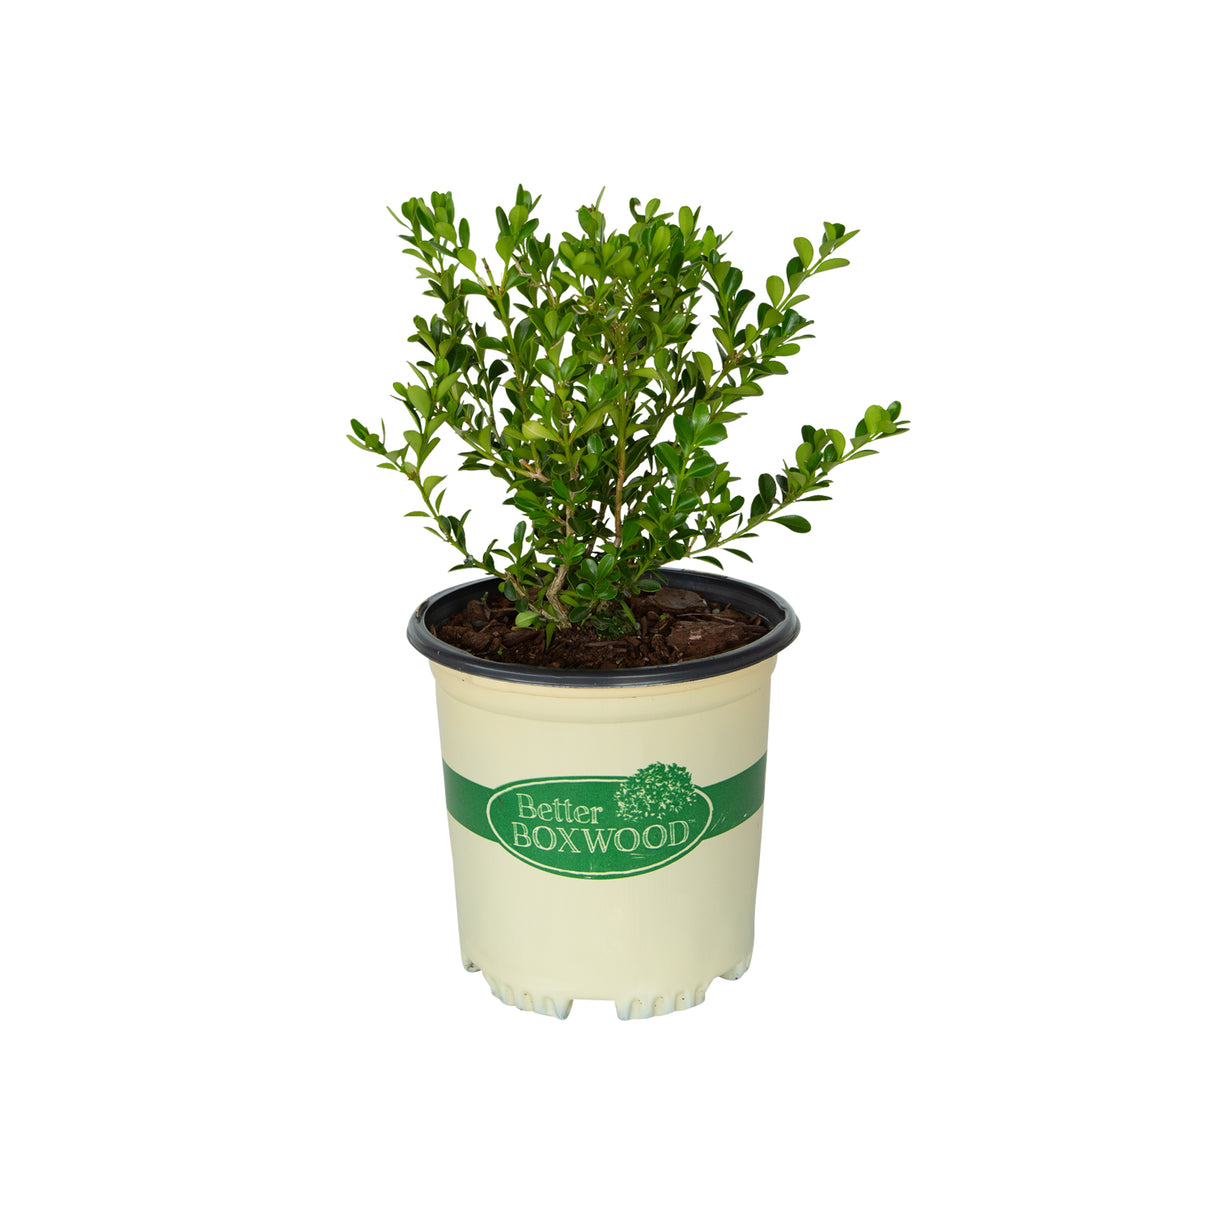 Renaissance Boxwood plant for sale with bright green foliage in a tan better boxwood container on a white background